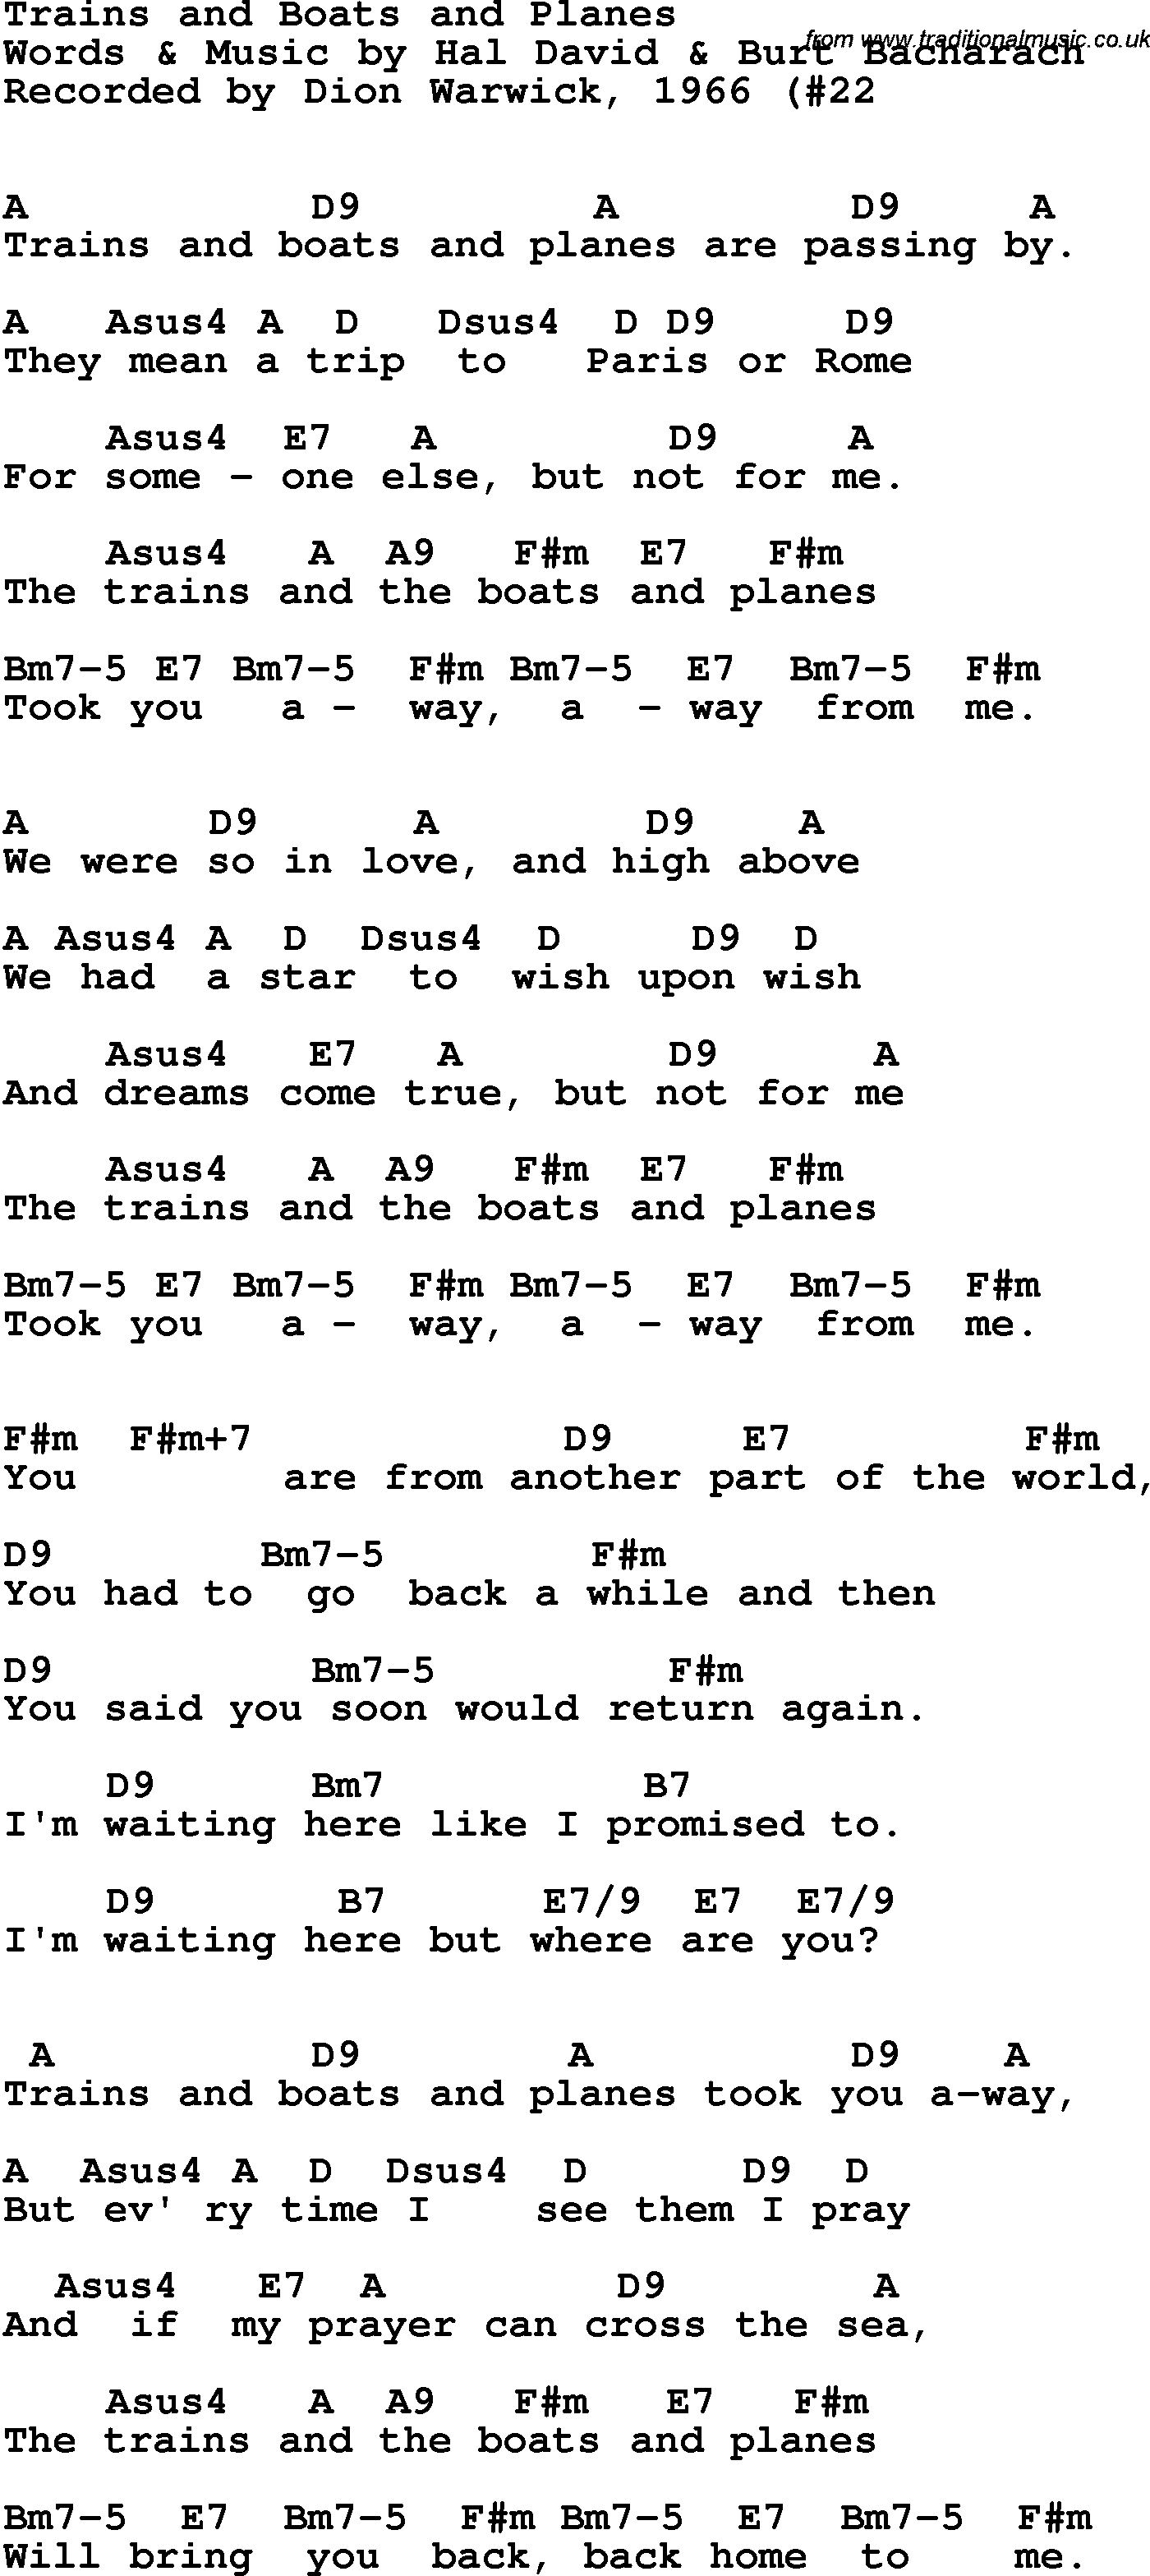 Song Lyrics with guitar chords for Trains And Boats And Planes - Dionne Warwick, 1962